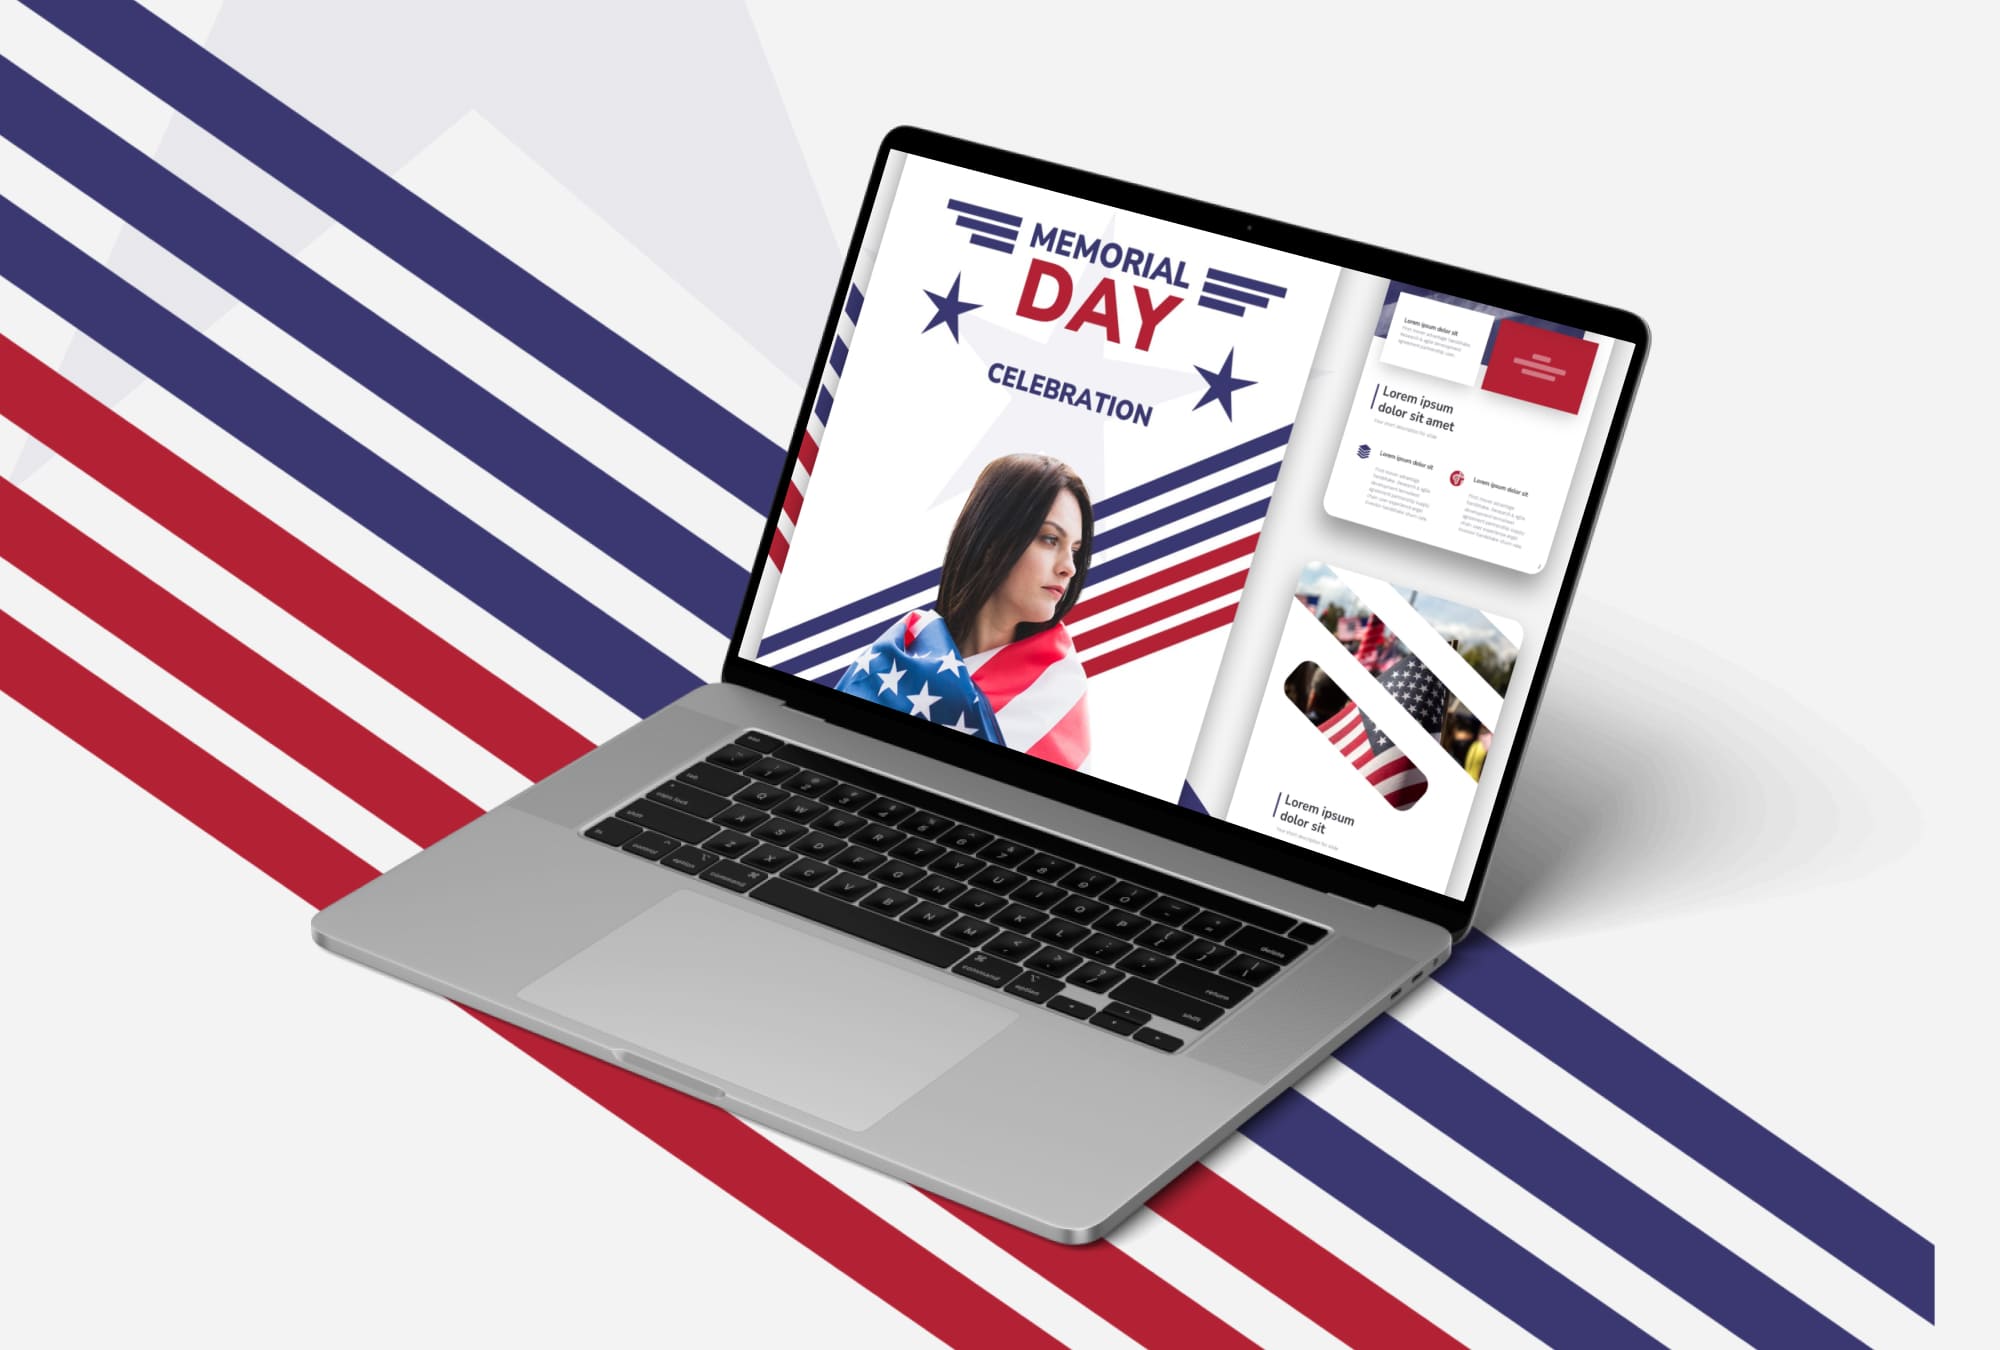 Preview MemorialDay Presentation Template on the laptop.